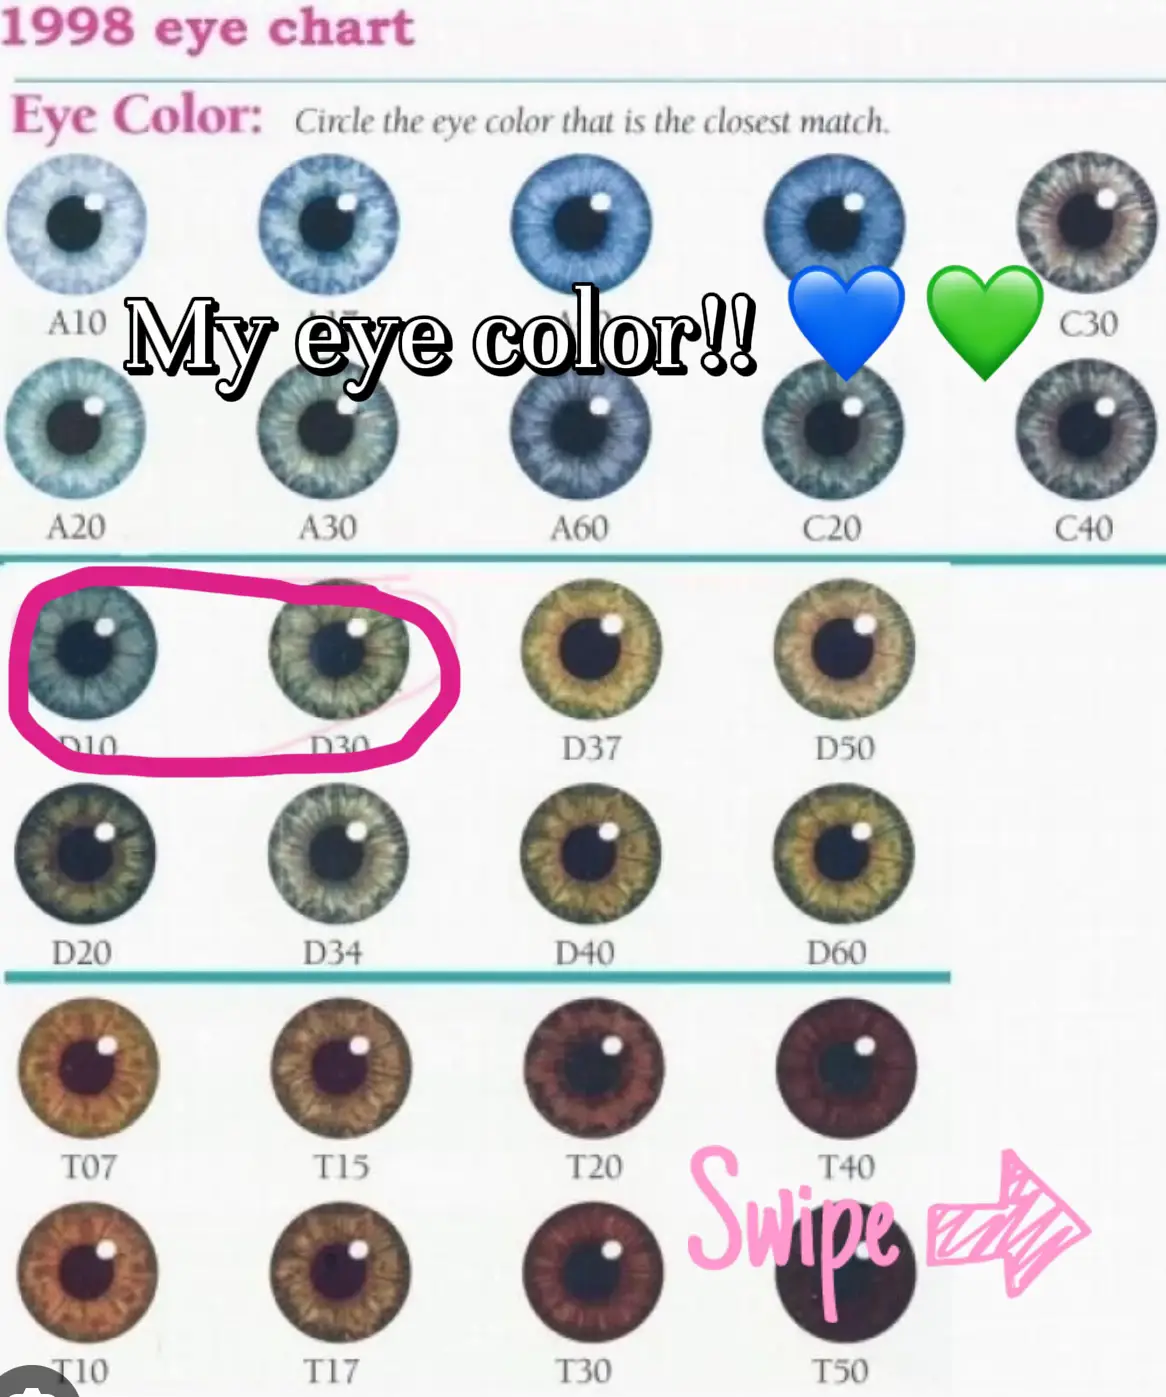 Eye Color Guessing Game - Lemon8 Search